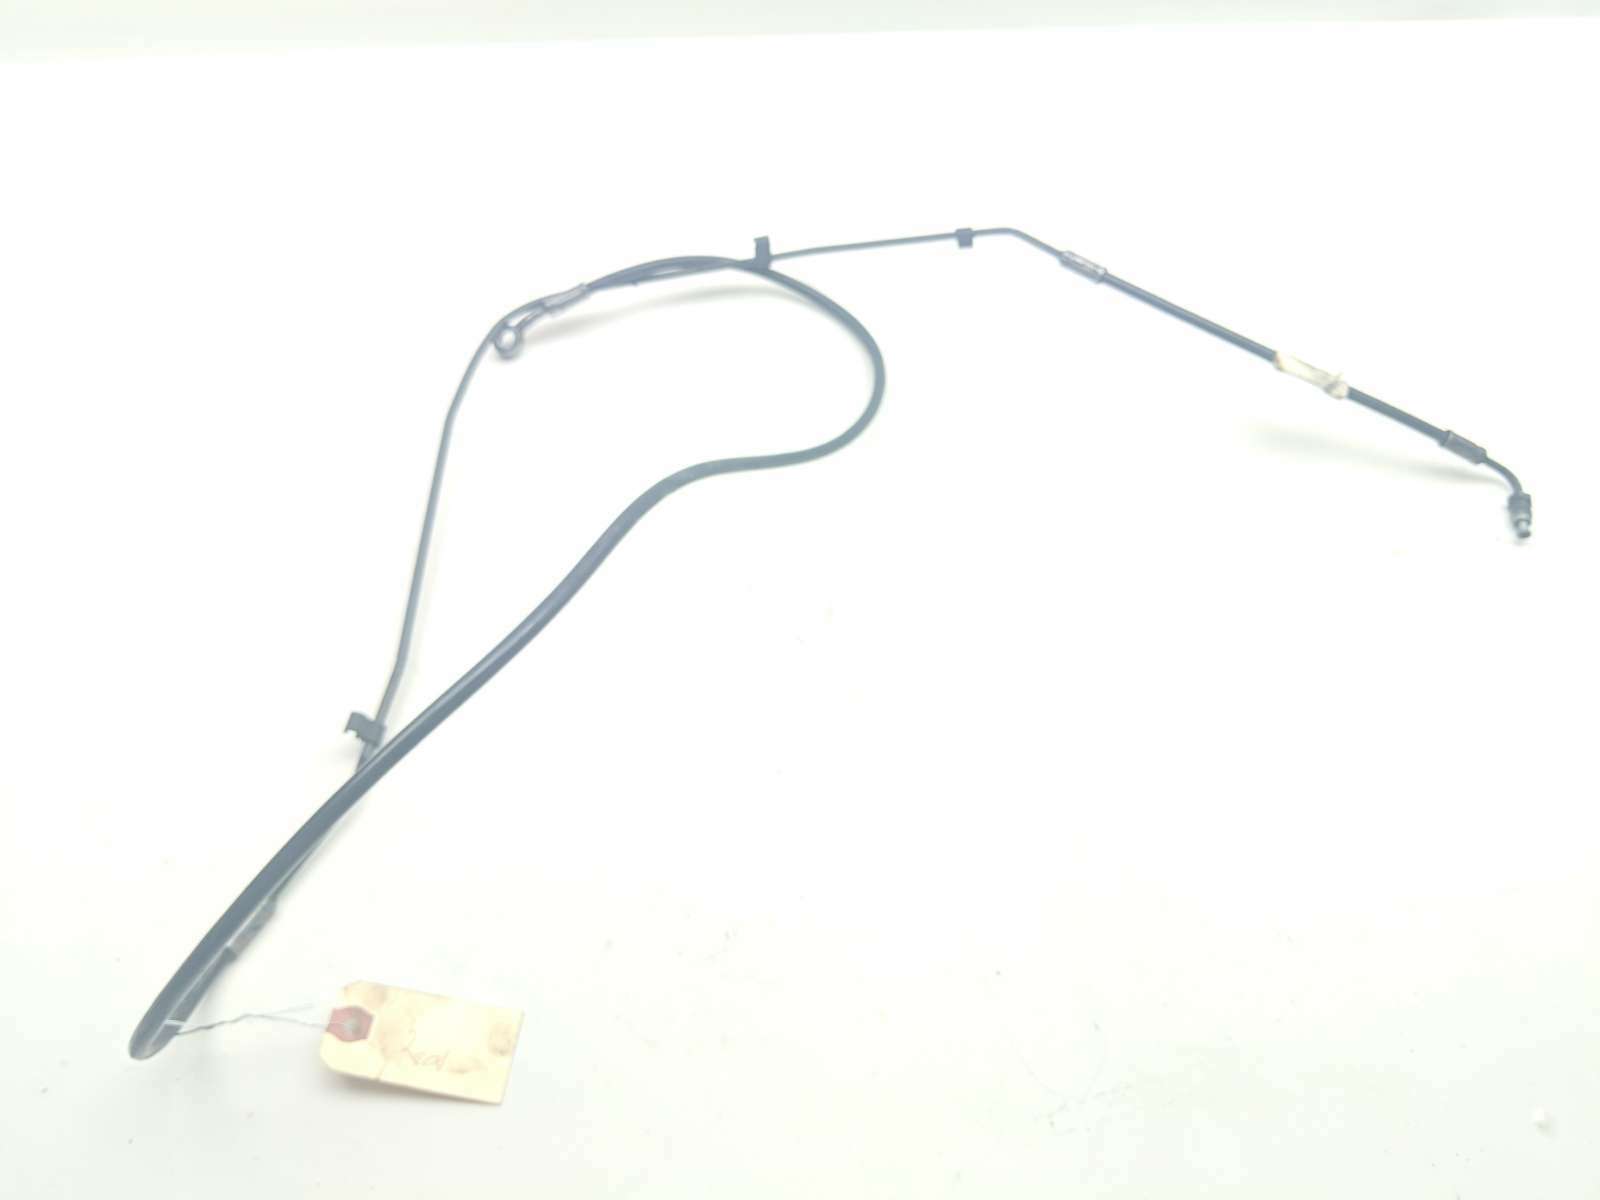 12 Victory Cross Country Tour 1731 Rear Brake Cable Line Hose